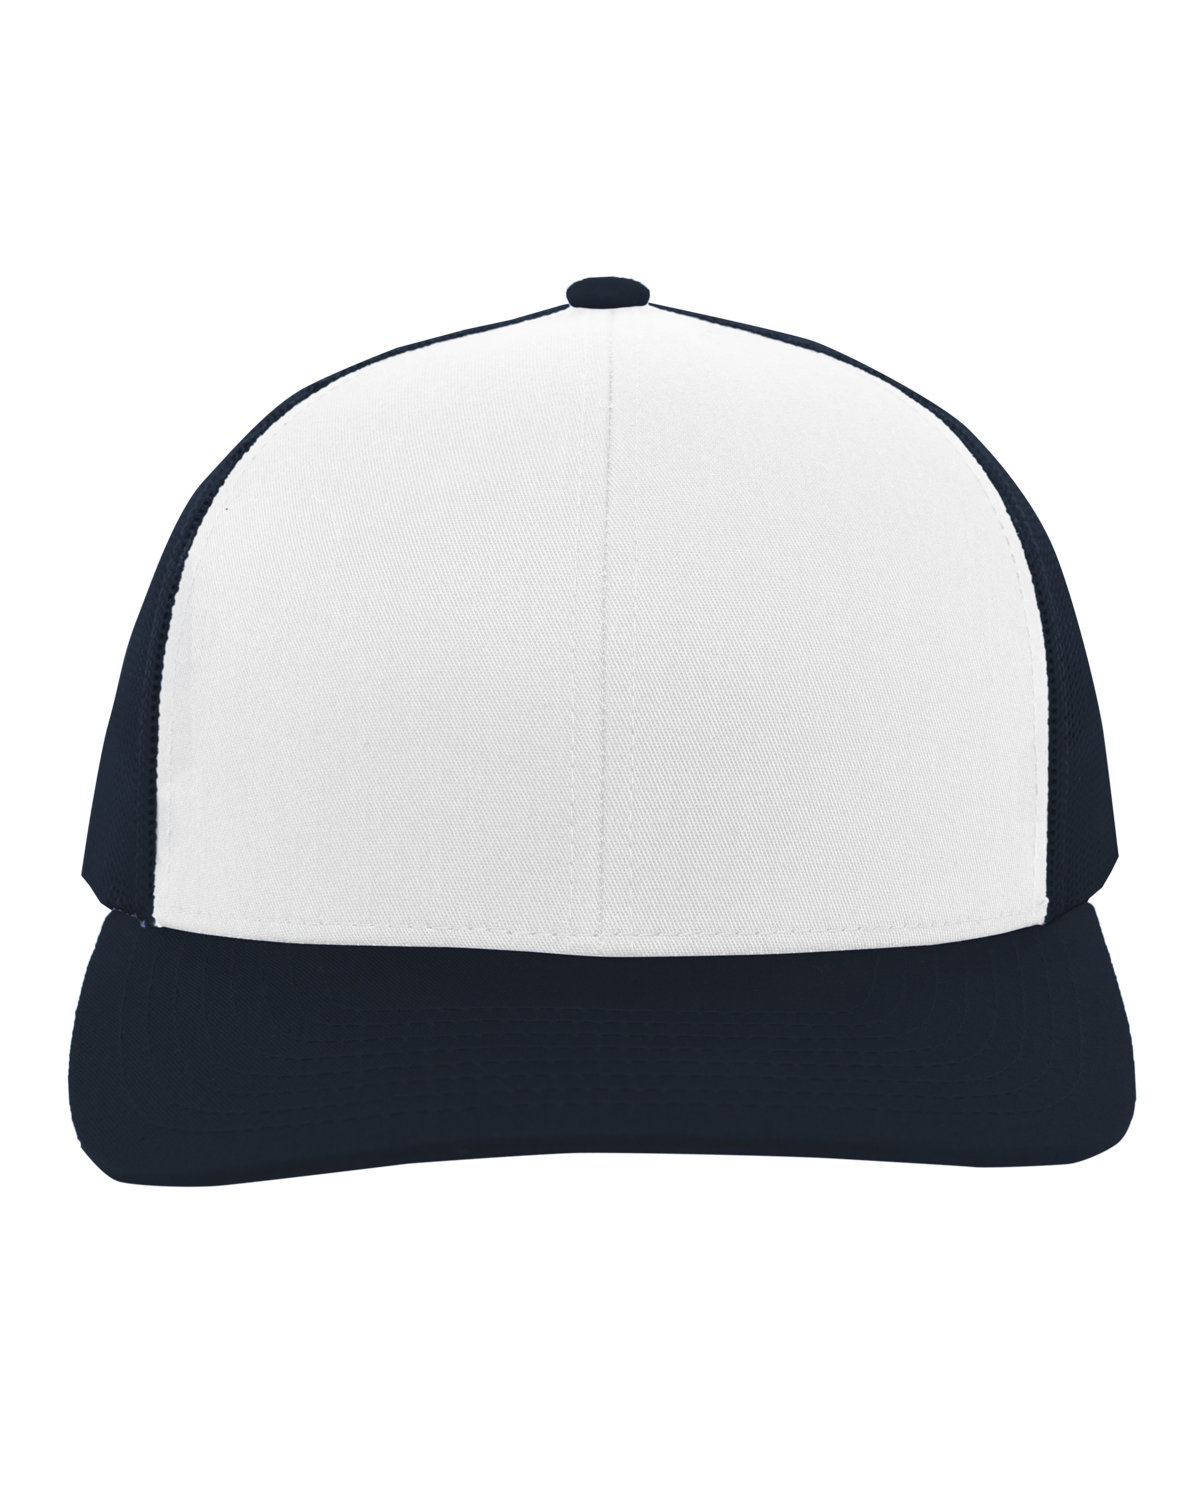 Pacific Headwear Trucker Snapback Hat WHITE/ NVY/ NVY 